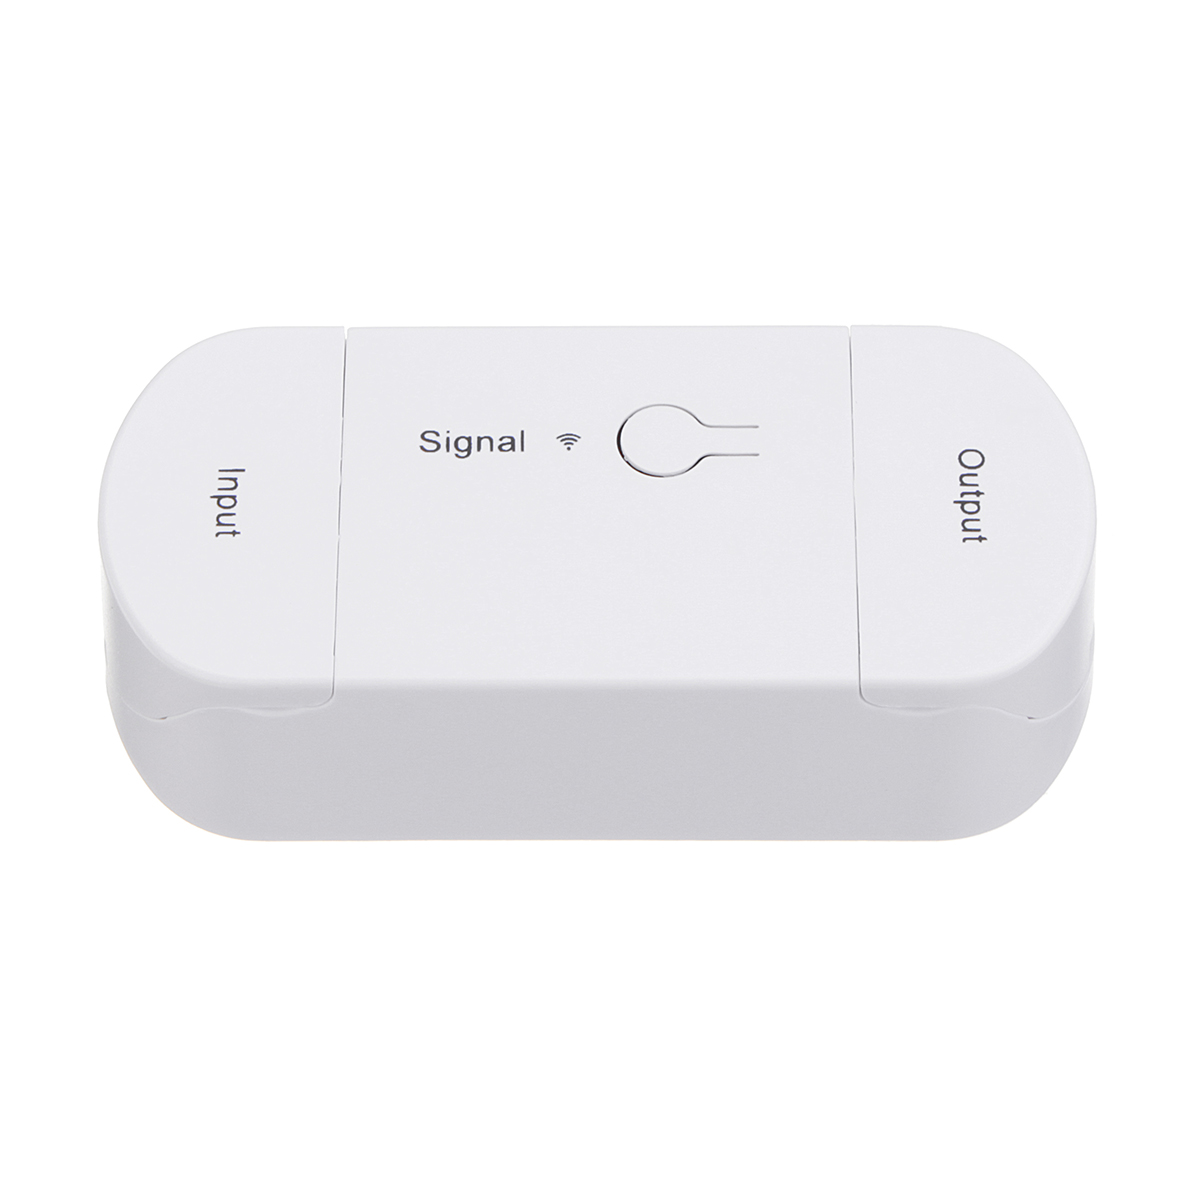 110-220V-Smart-Remote-Control-Wifi-Switch-Smart-Home-Wireless-Controller-Support-For-Alexa-Assistant-1319767-4